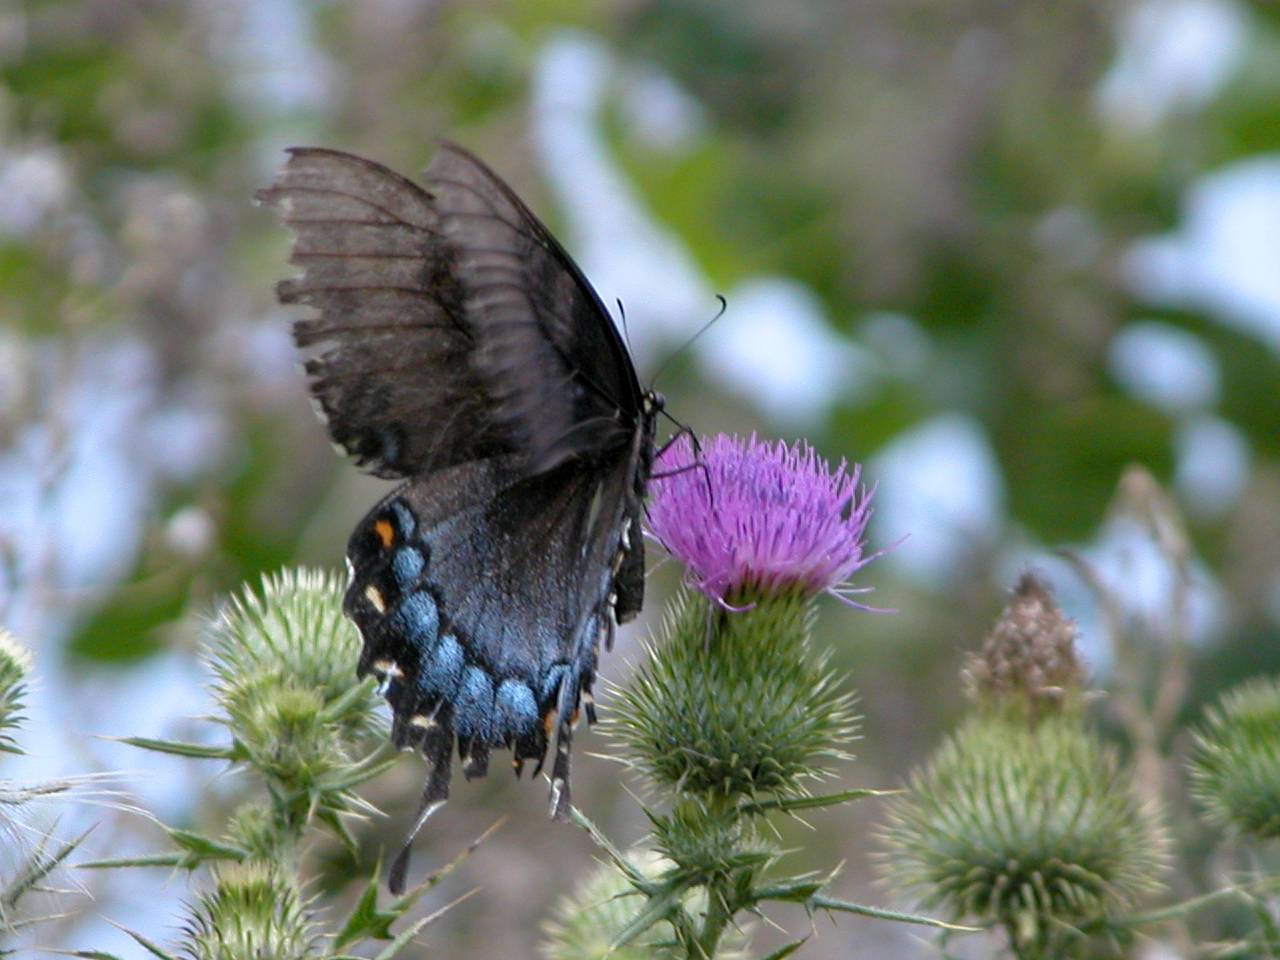 Eastern Tiger Swallowtail on Field Thistle